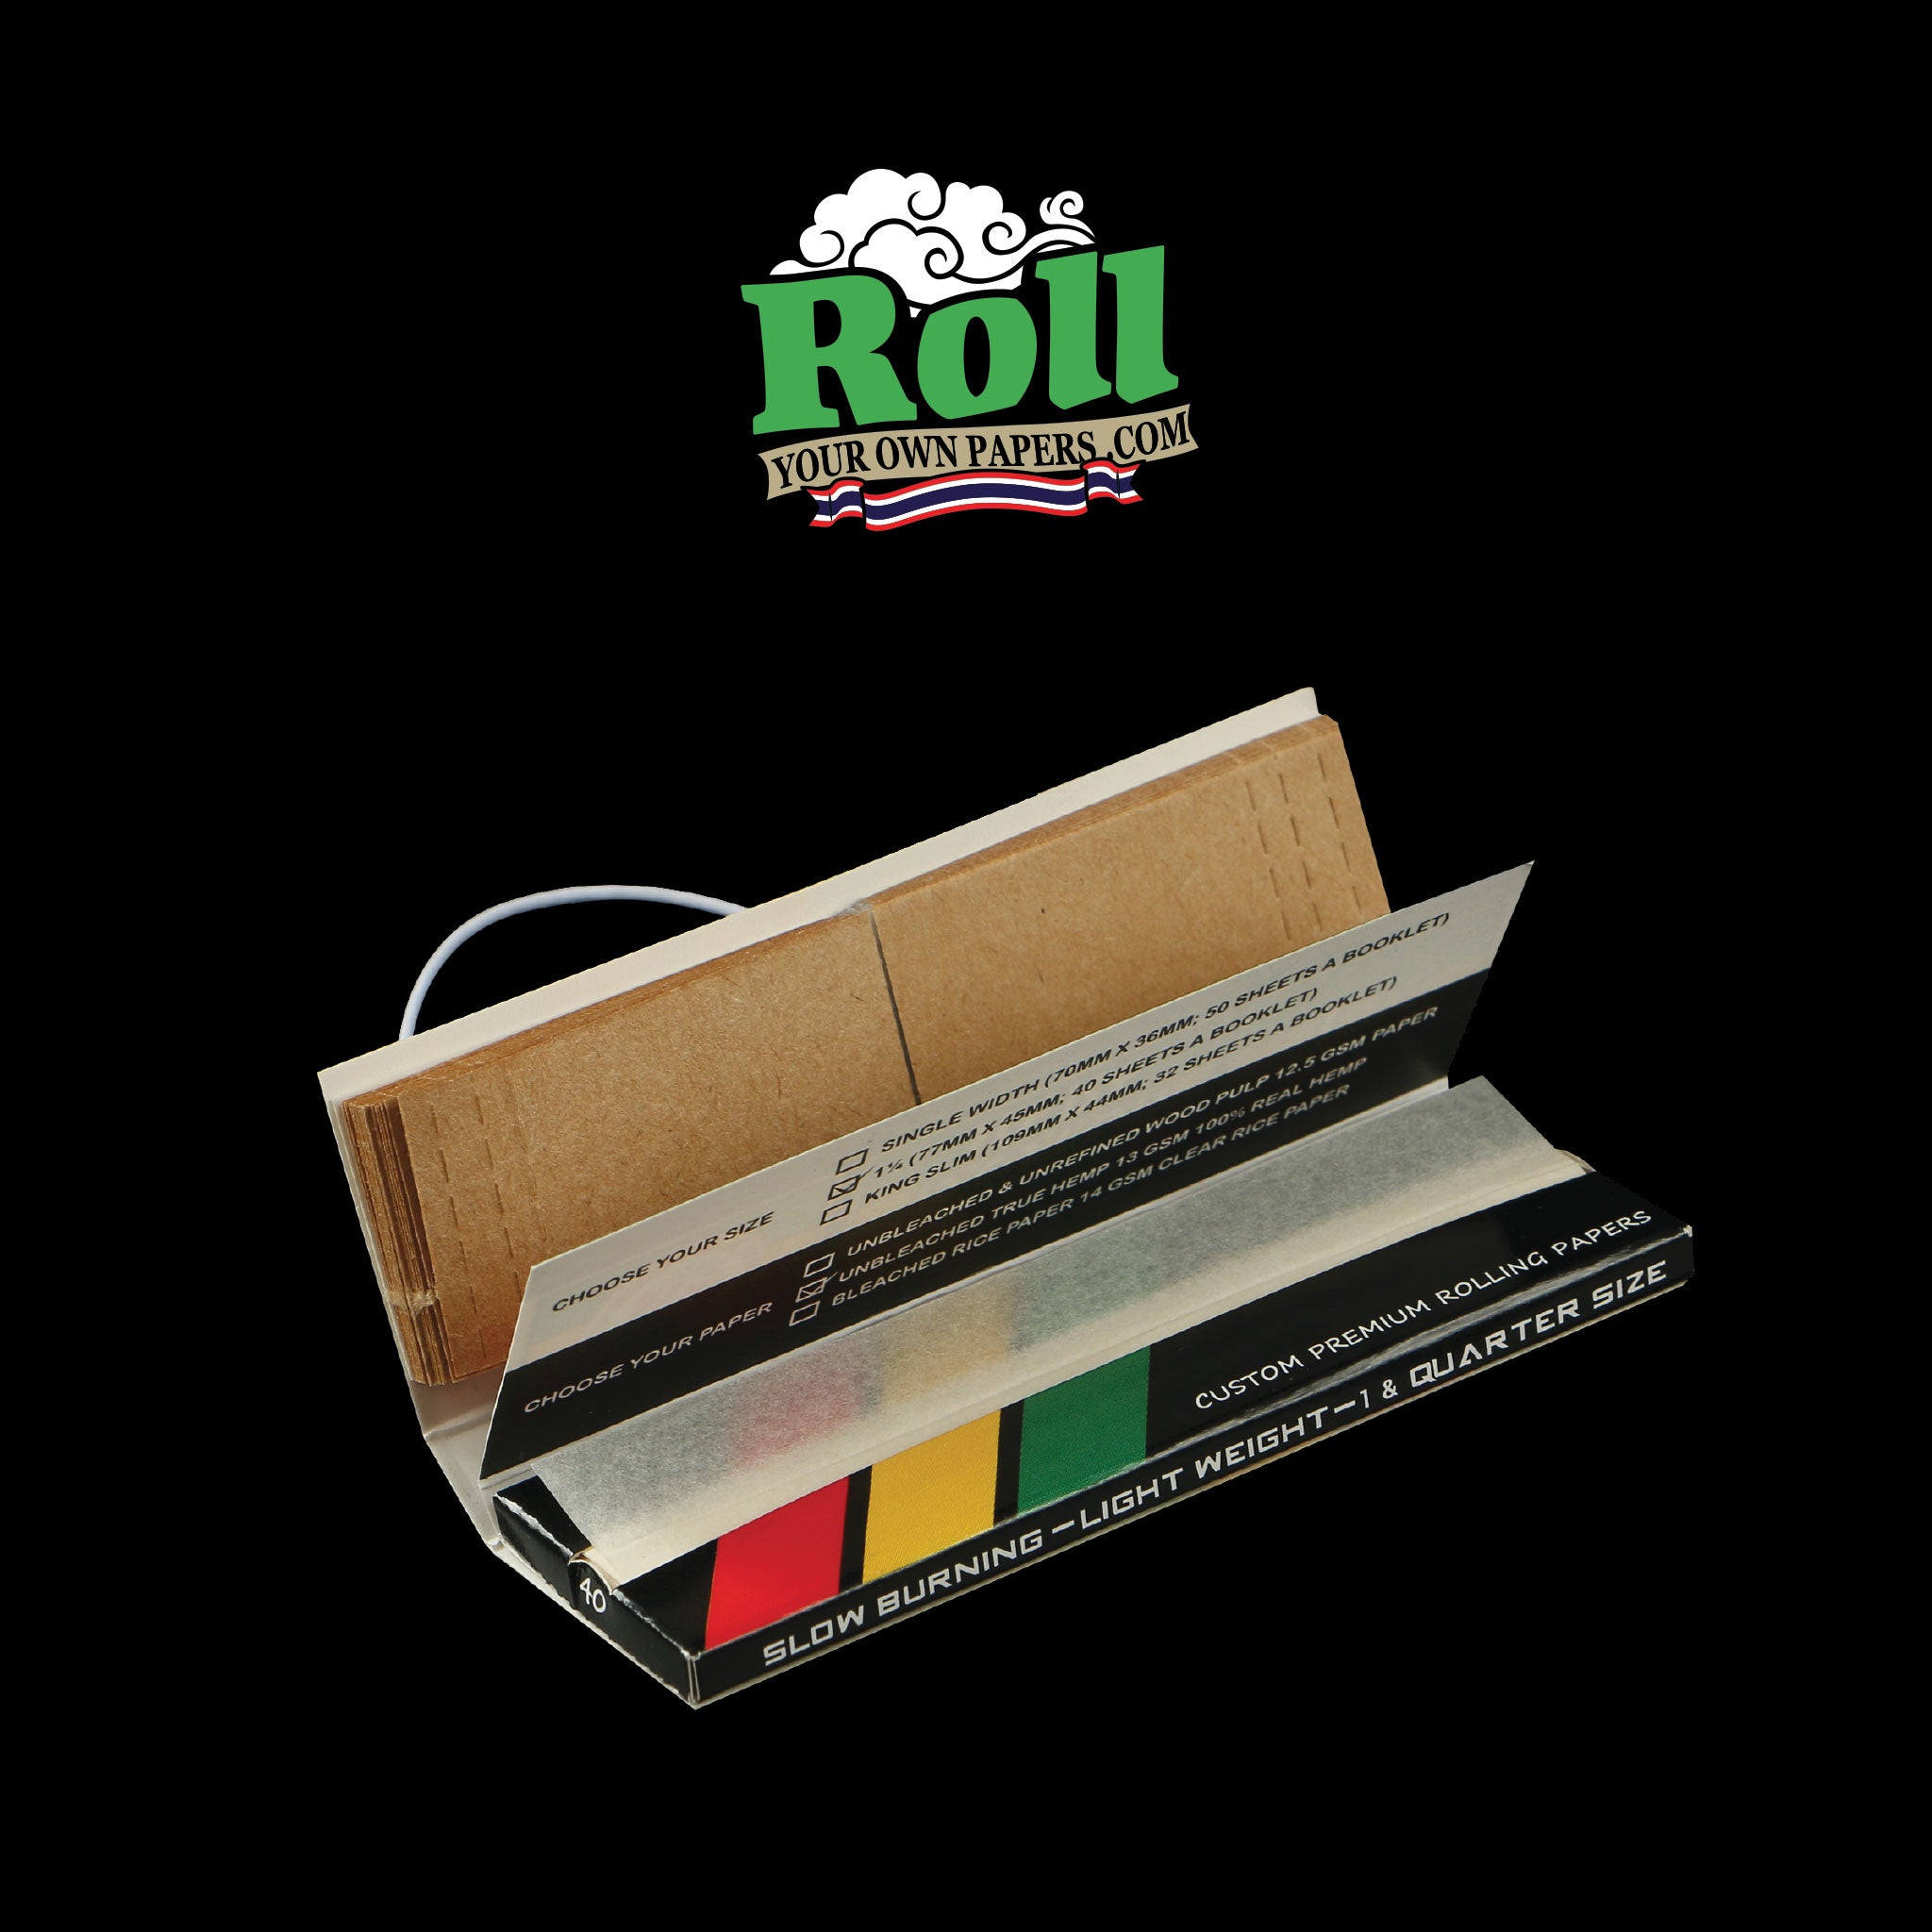 Thailand Custom Rolling Papers Price Manufacturer cheap RYOP Thailand.